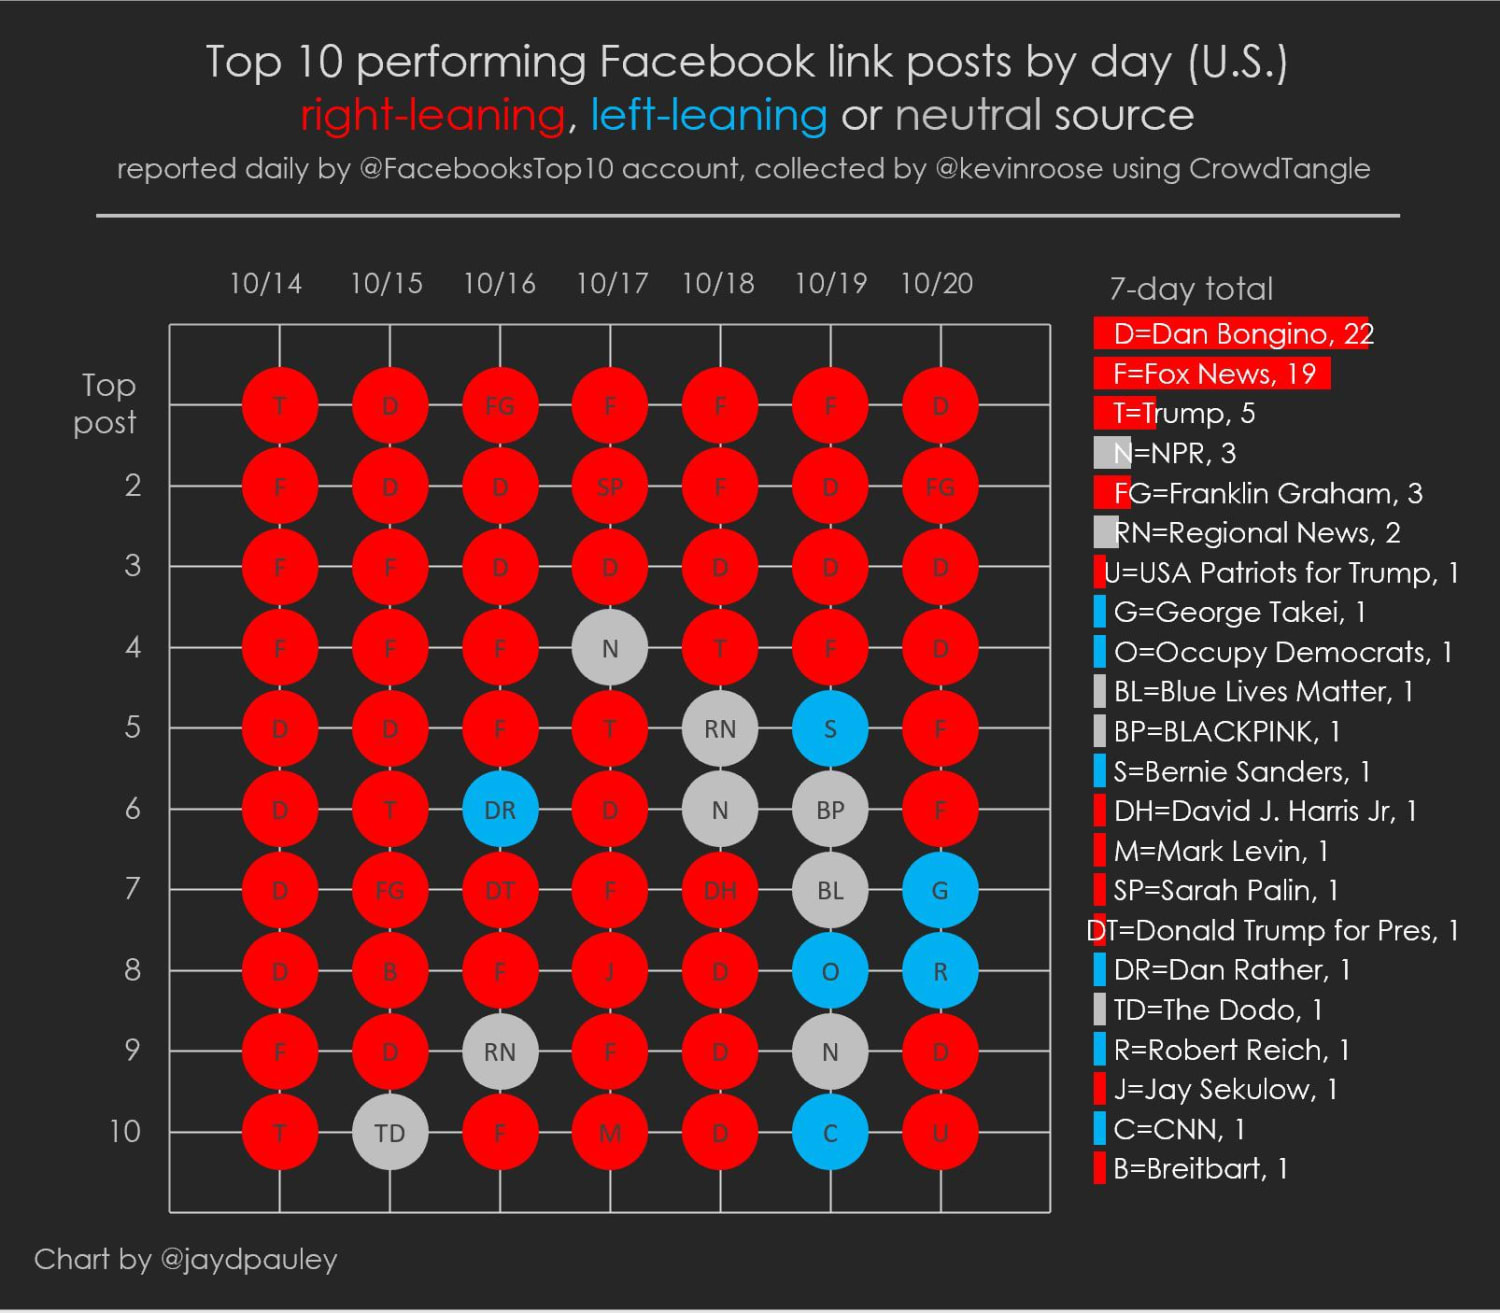 100% of the daily top three performing Facebook posts in the last 7 days are from conservative sources. (Daily top-10 in the past seven days: 80% Conservative, 9% Left-leaning, 11% neutral)